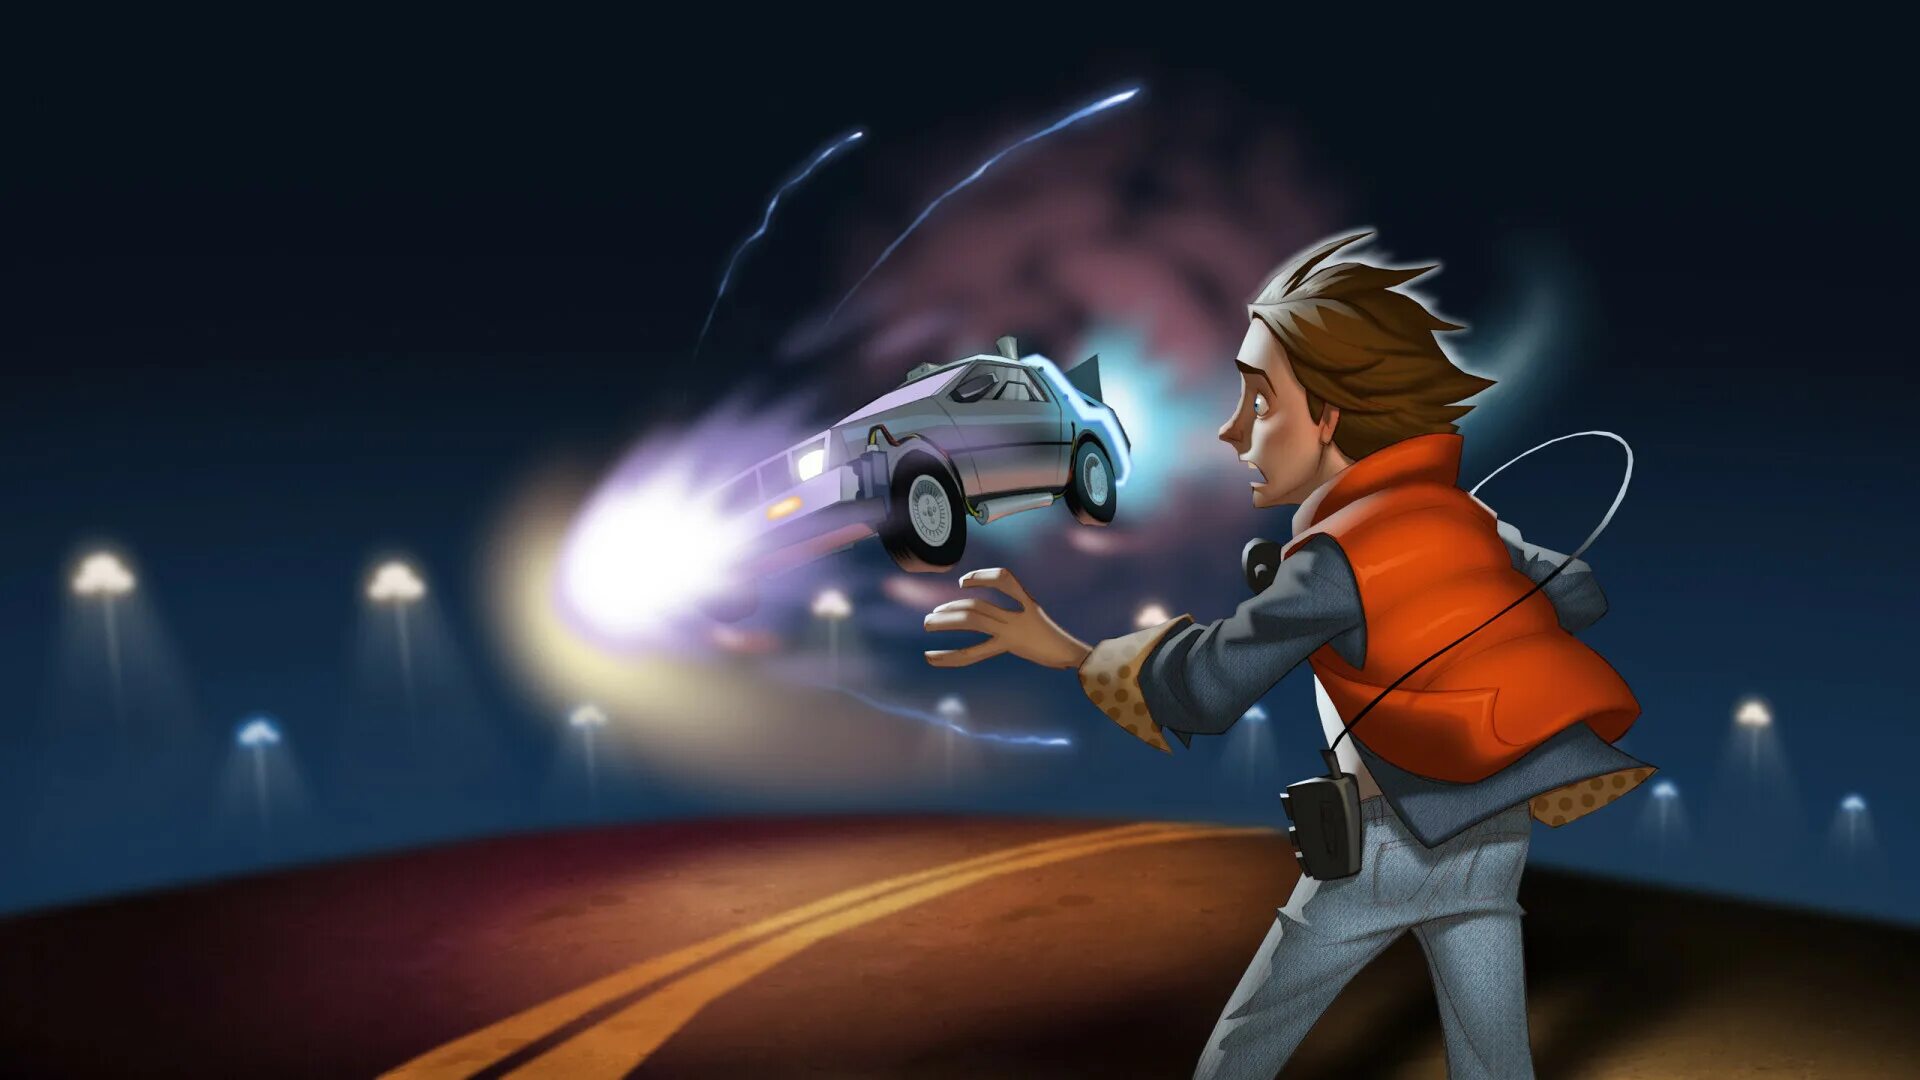 Back to the Future (игра, 1985). Back to the Future the game назад в будущее. Back to the Future 2 игра. Назад в будущее игра эпизод 1.